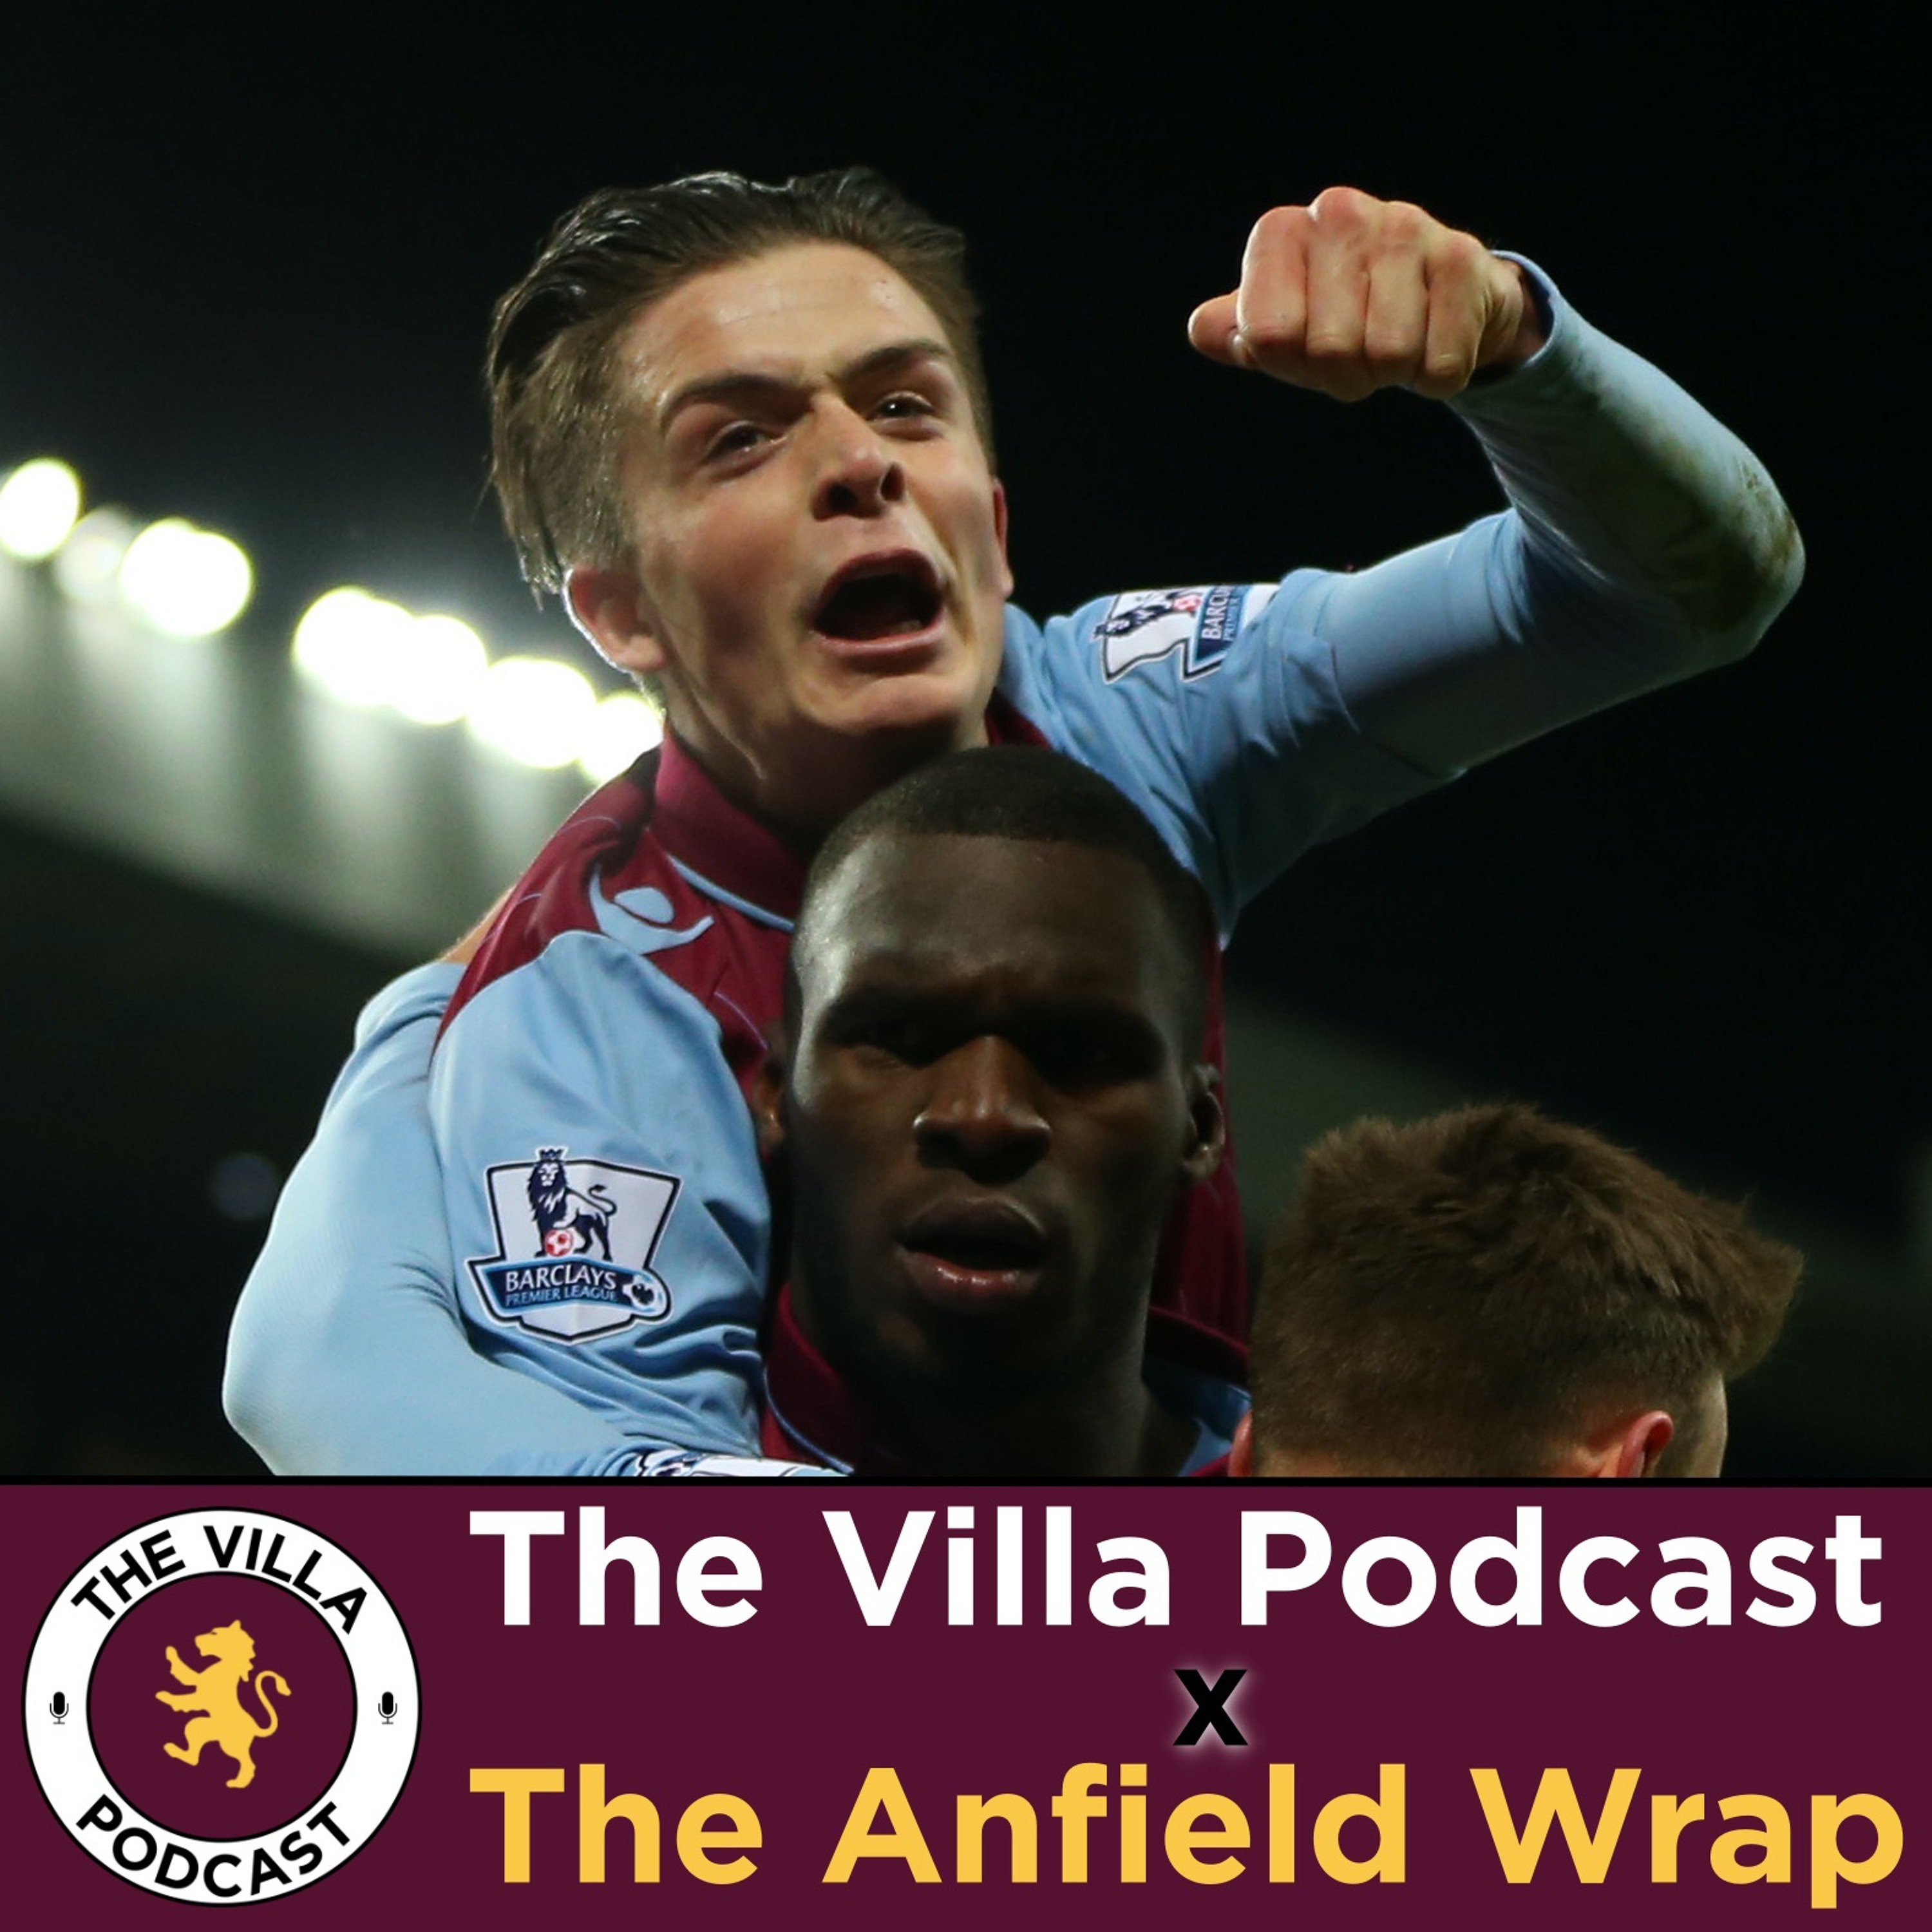 Important message about Jack Grealish, 5 subs insult and The Anfield Wrap view